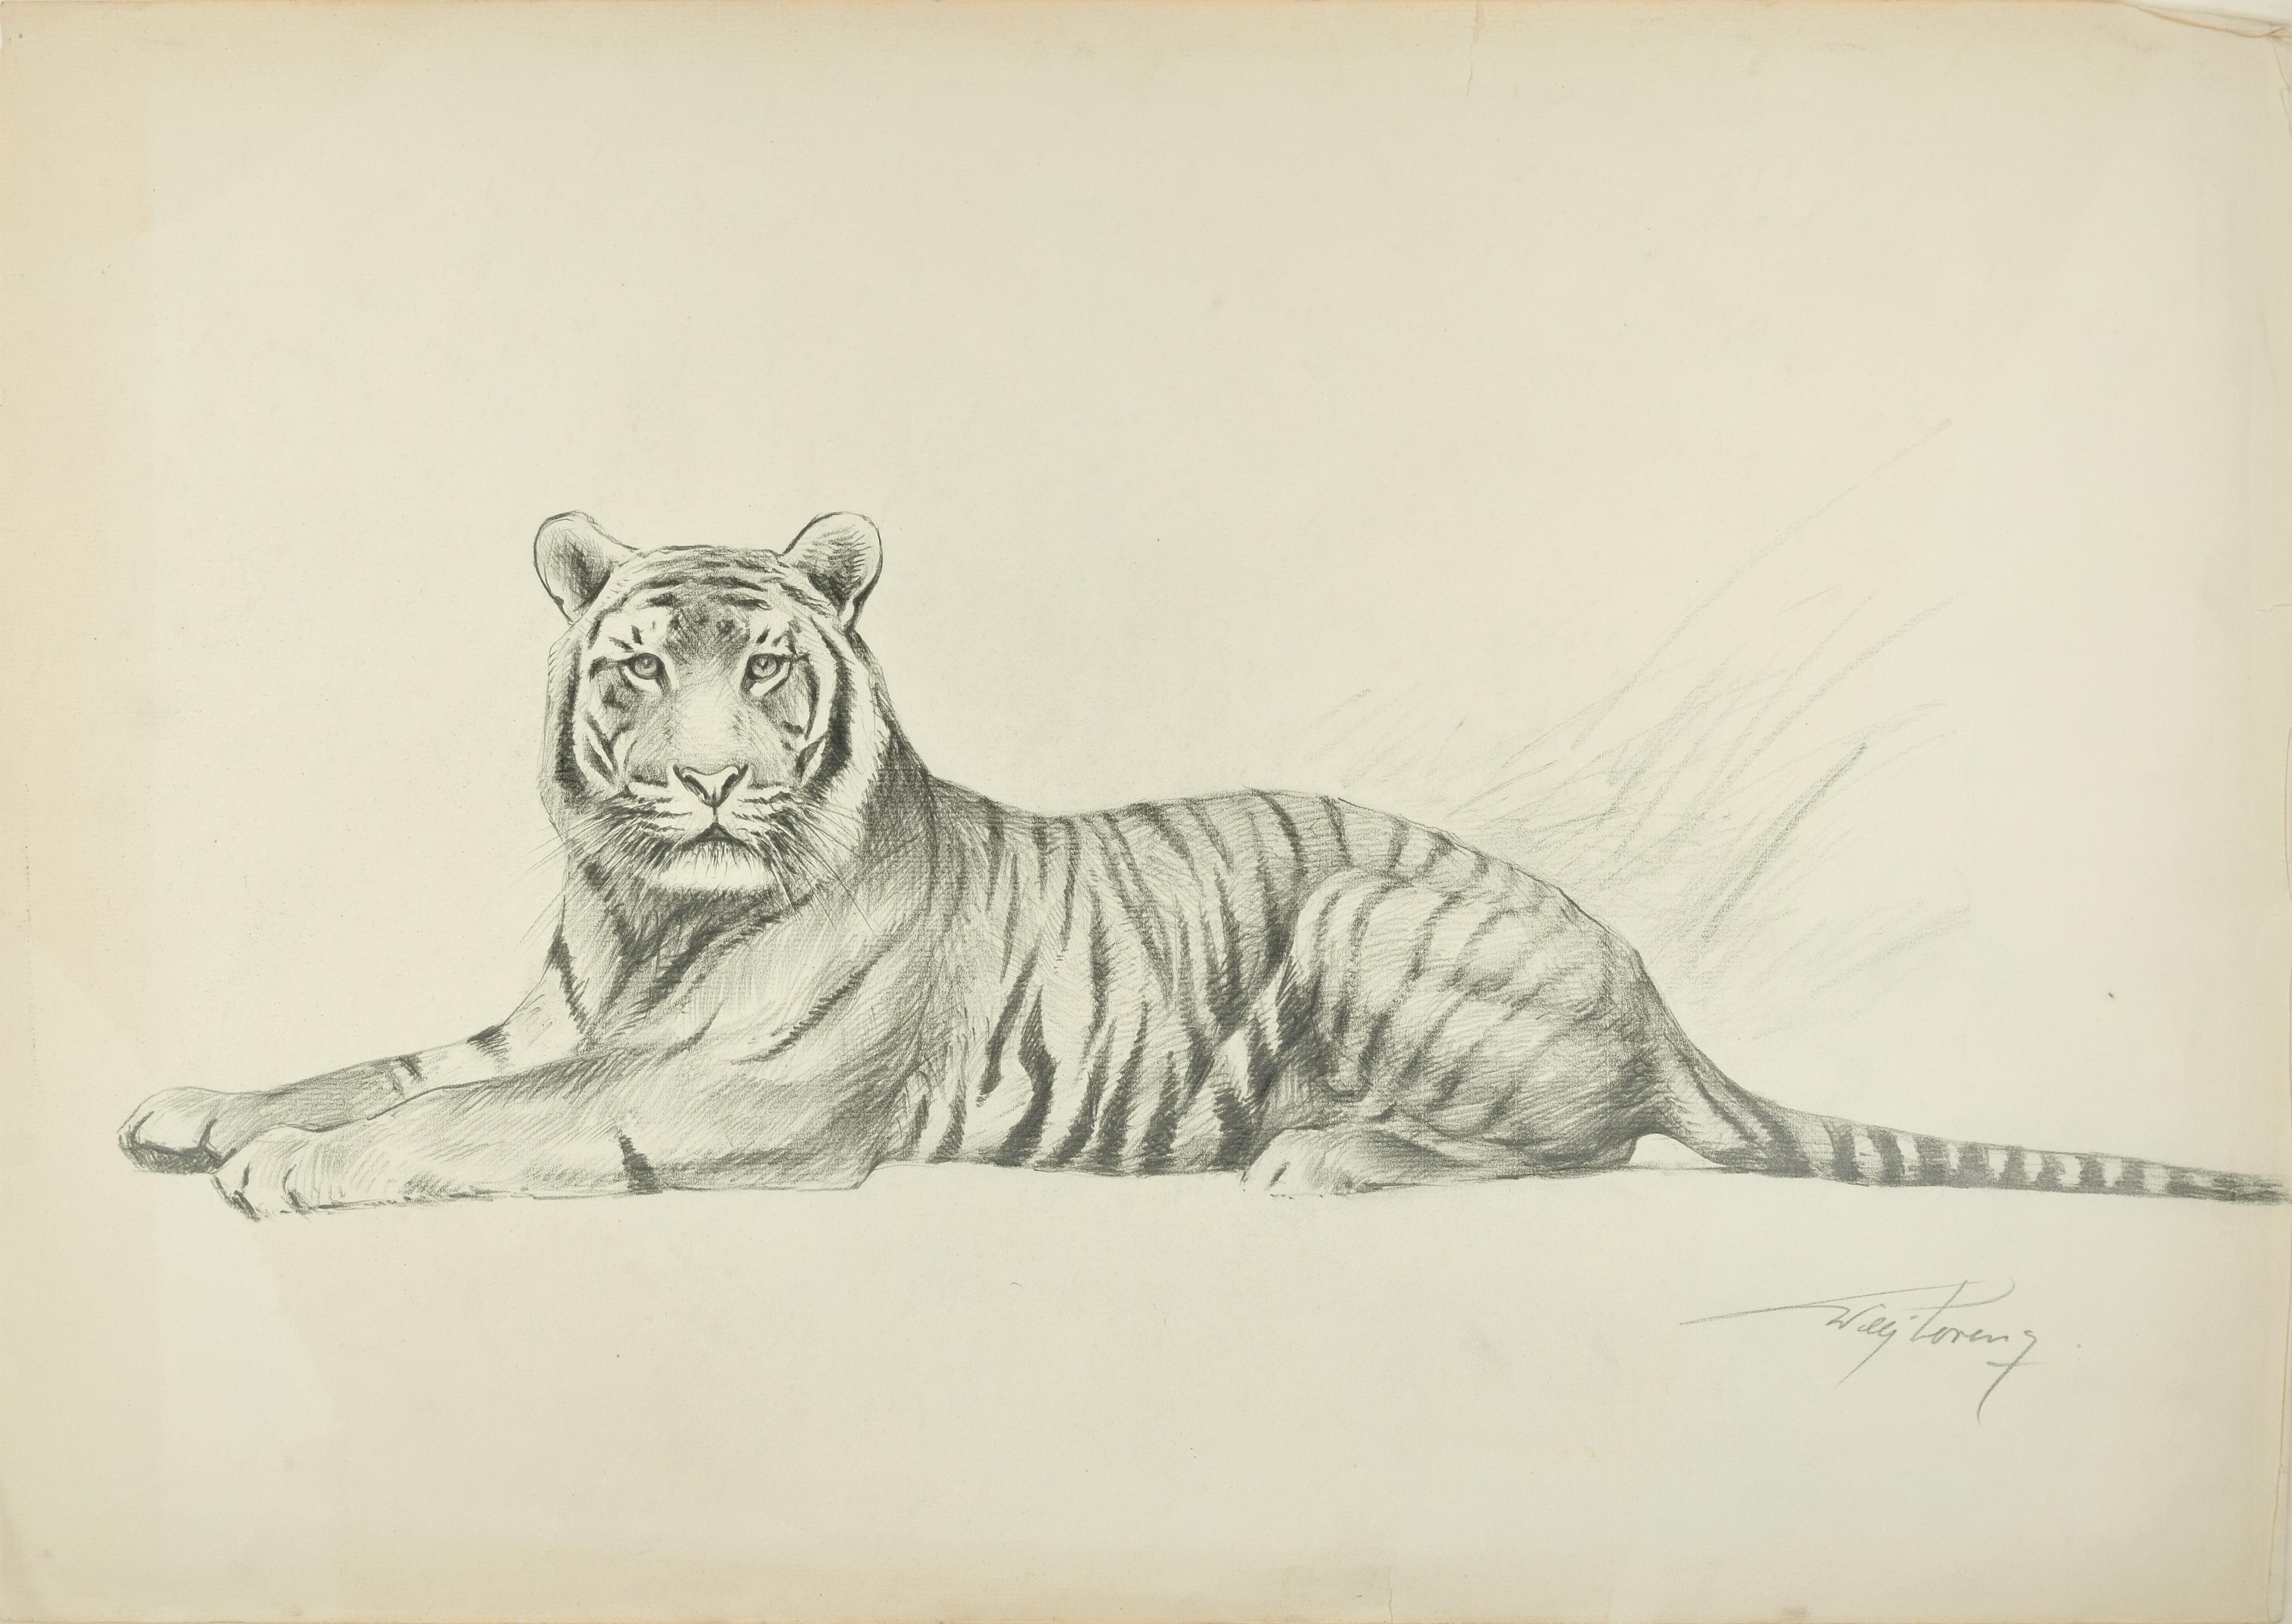 Tiger - Original Pencil Drawing by Willy Lorenz - Mid 20th Century